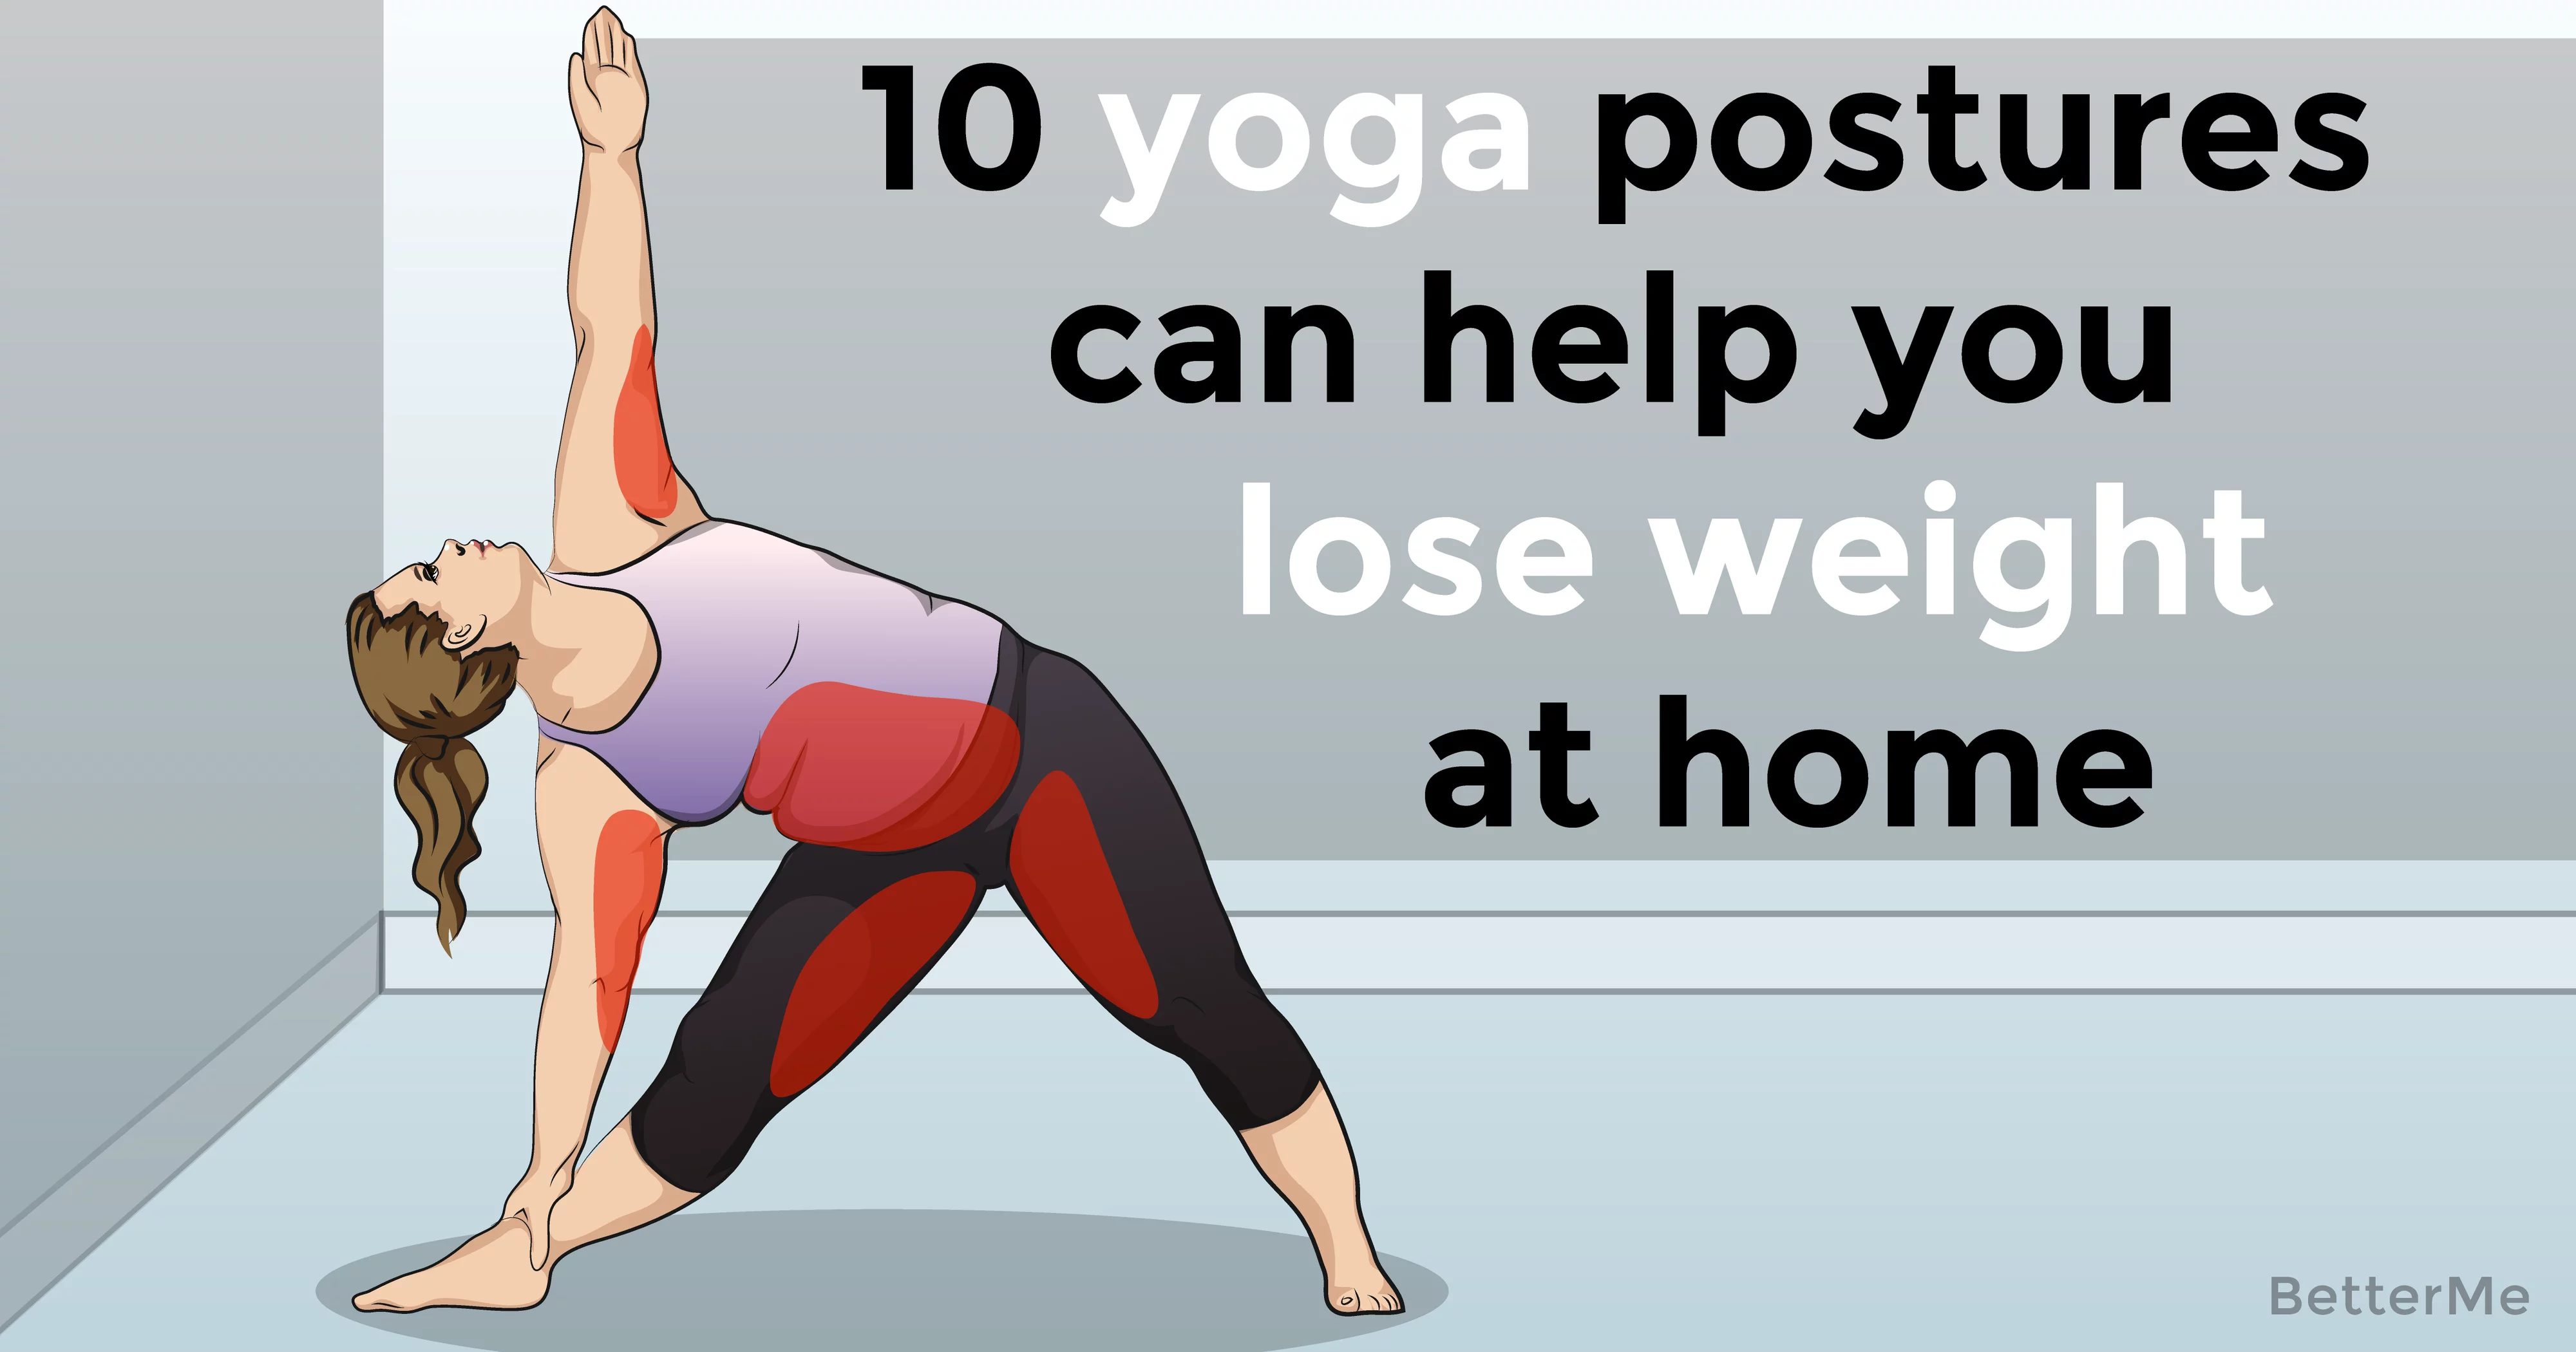 10 yoga postures can help you lose weight at home